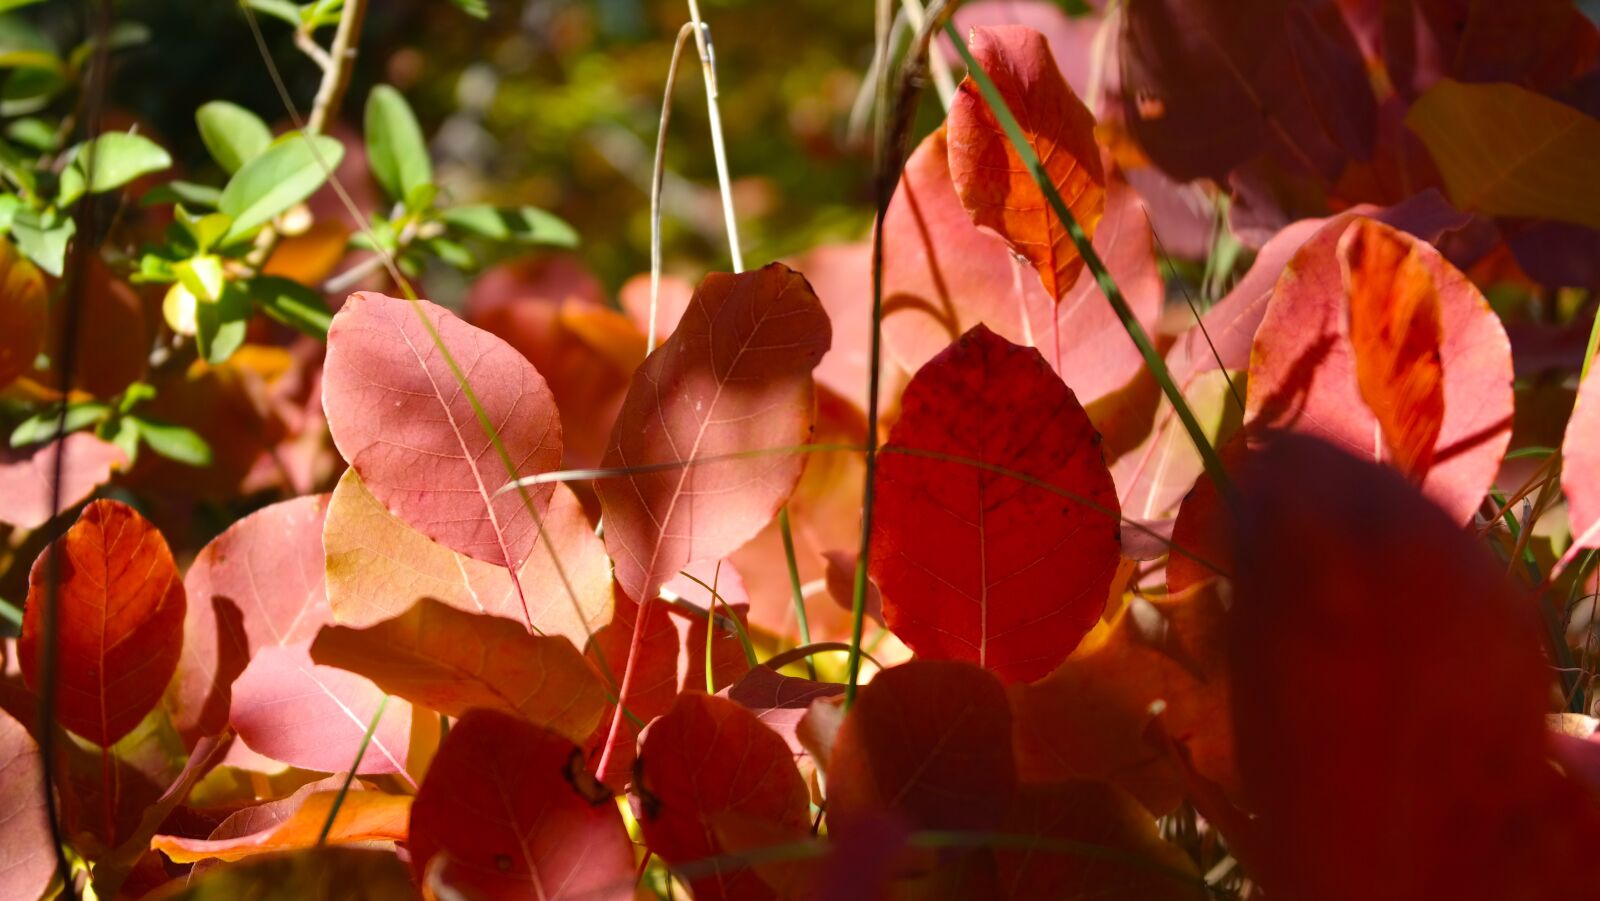 Samsung NX300 sample photo. Leaves, red, autumn foliage photography